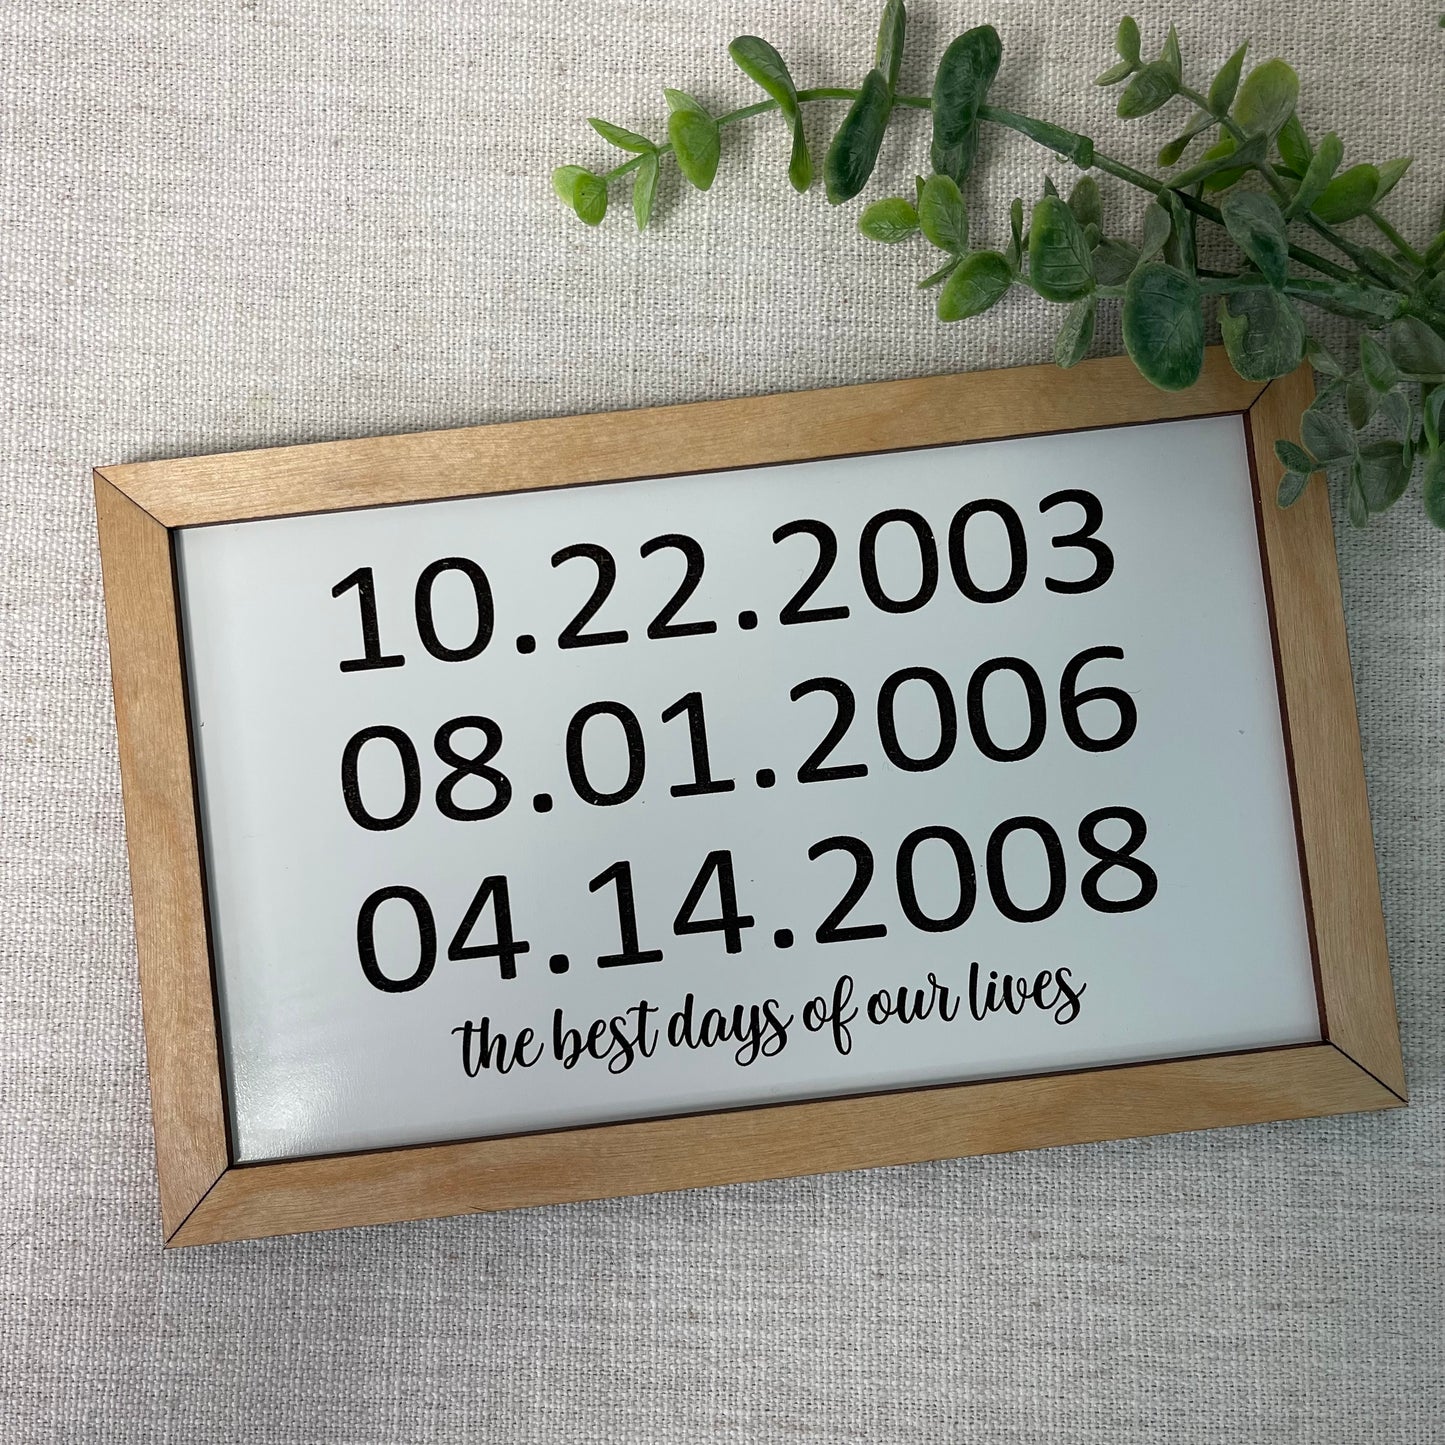 The Best Days of Our Lives Sign